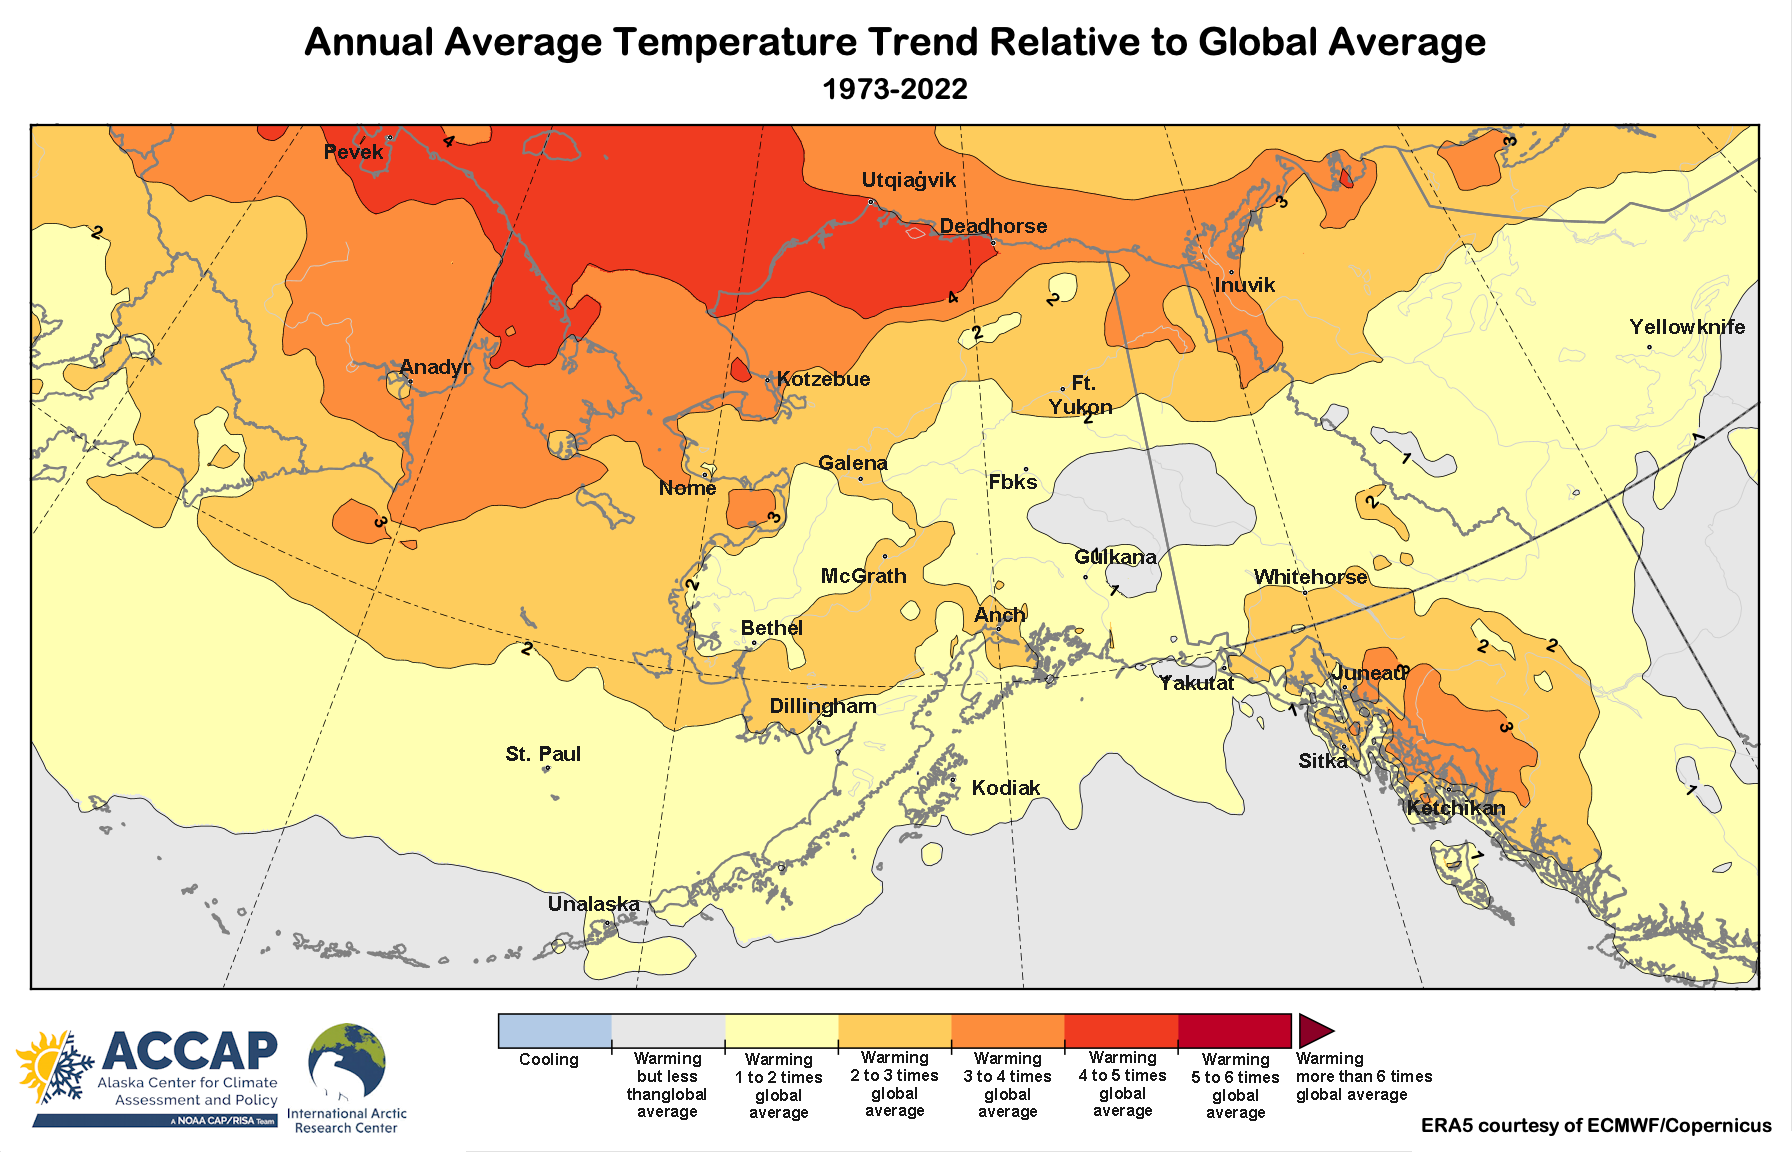 Alaska Reference Maps  February 2015 National Climate Report